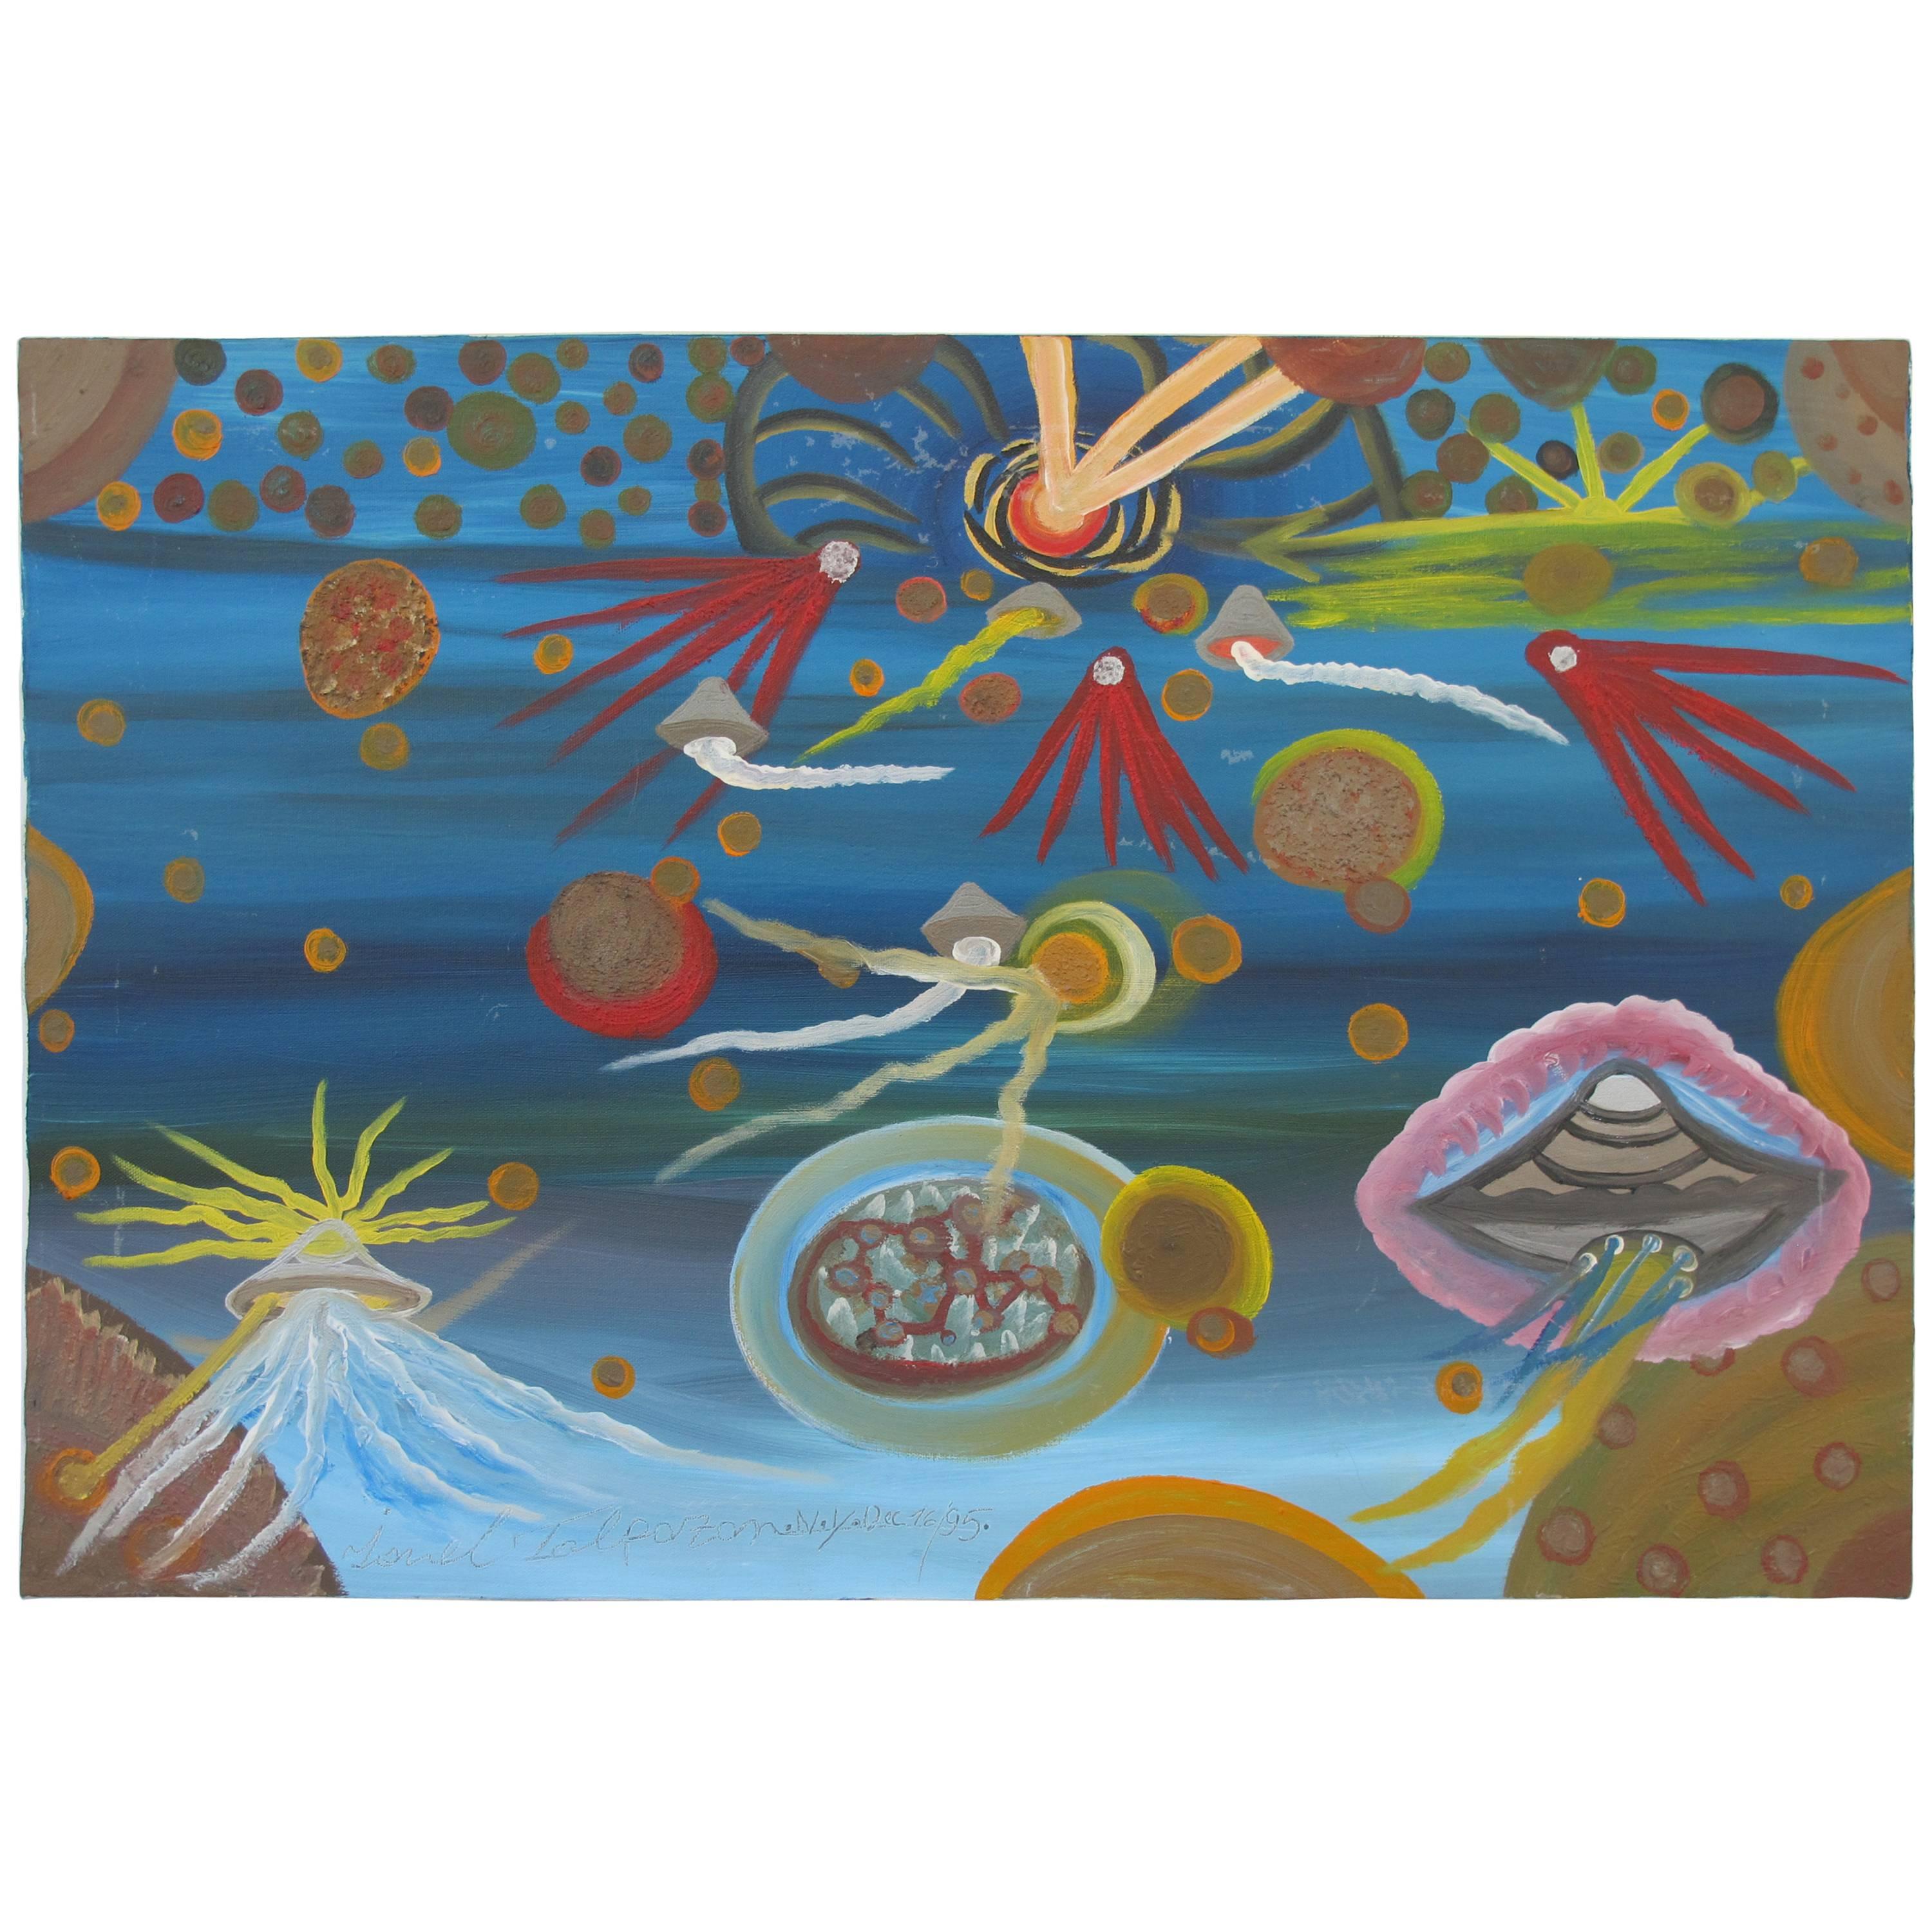 Ionel Talpazan Painting "Six UFOs in the Universe" For Sale